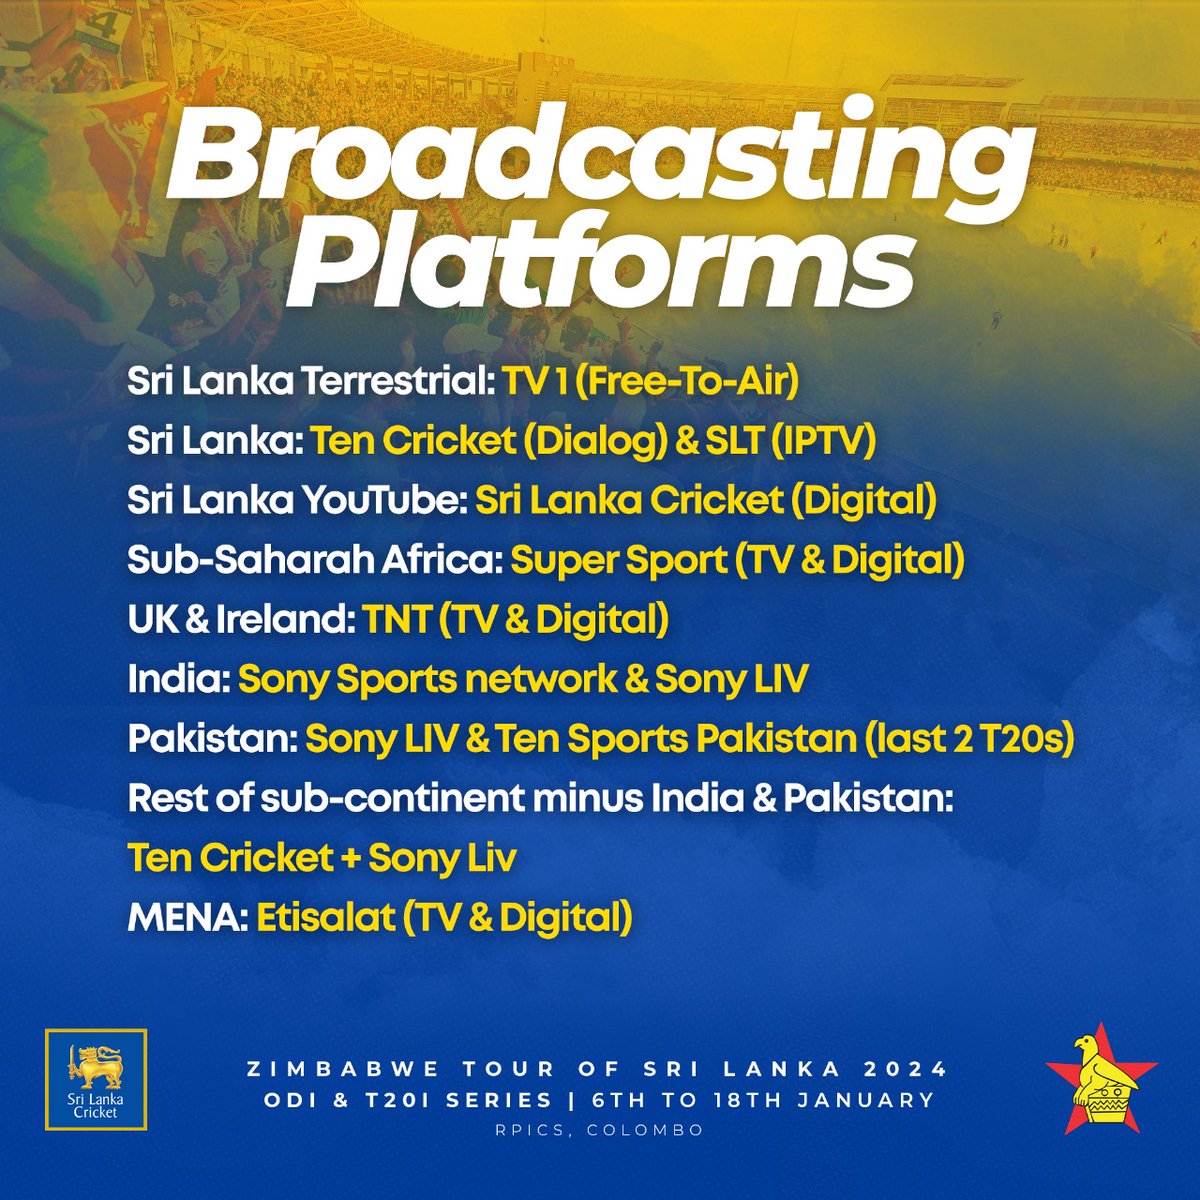 Catch all the live moments of the Sri Lanka vs Zimbabwe ODI series on below channels. Don't miss a single wicket or boundary! 👇#SLvZIM